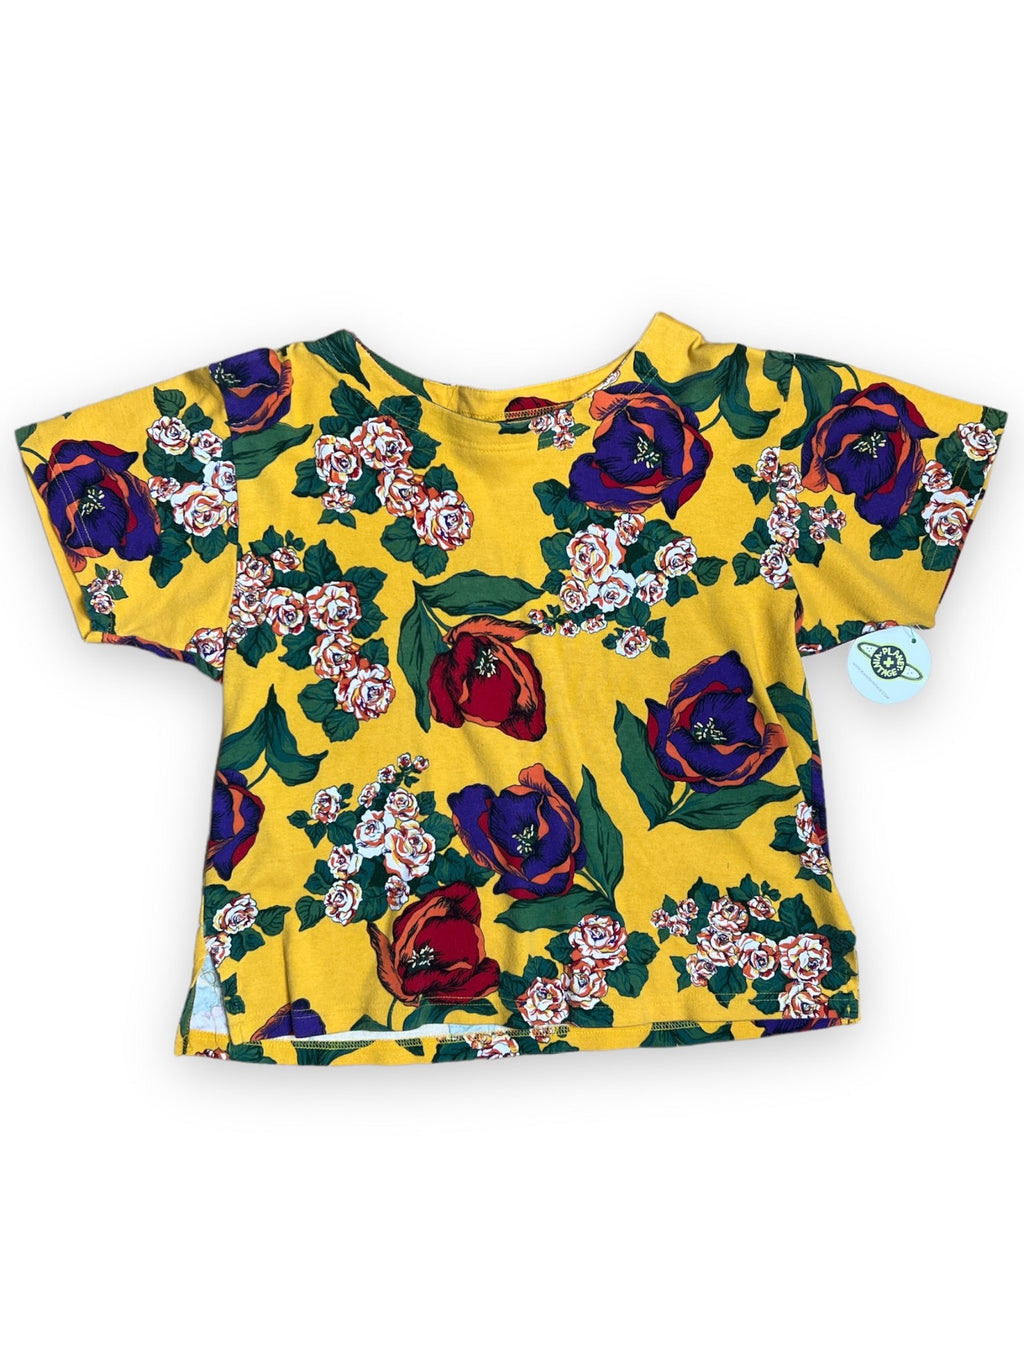 J.G. HOOK YELLOW FLORAL TEE